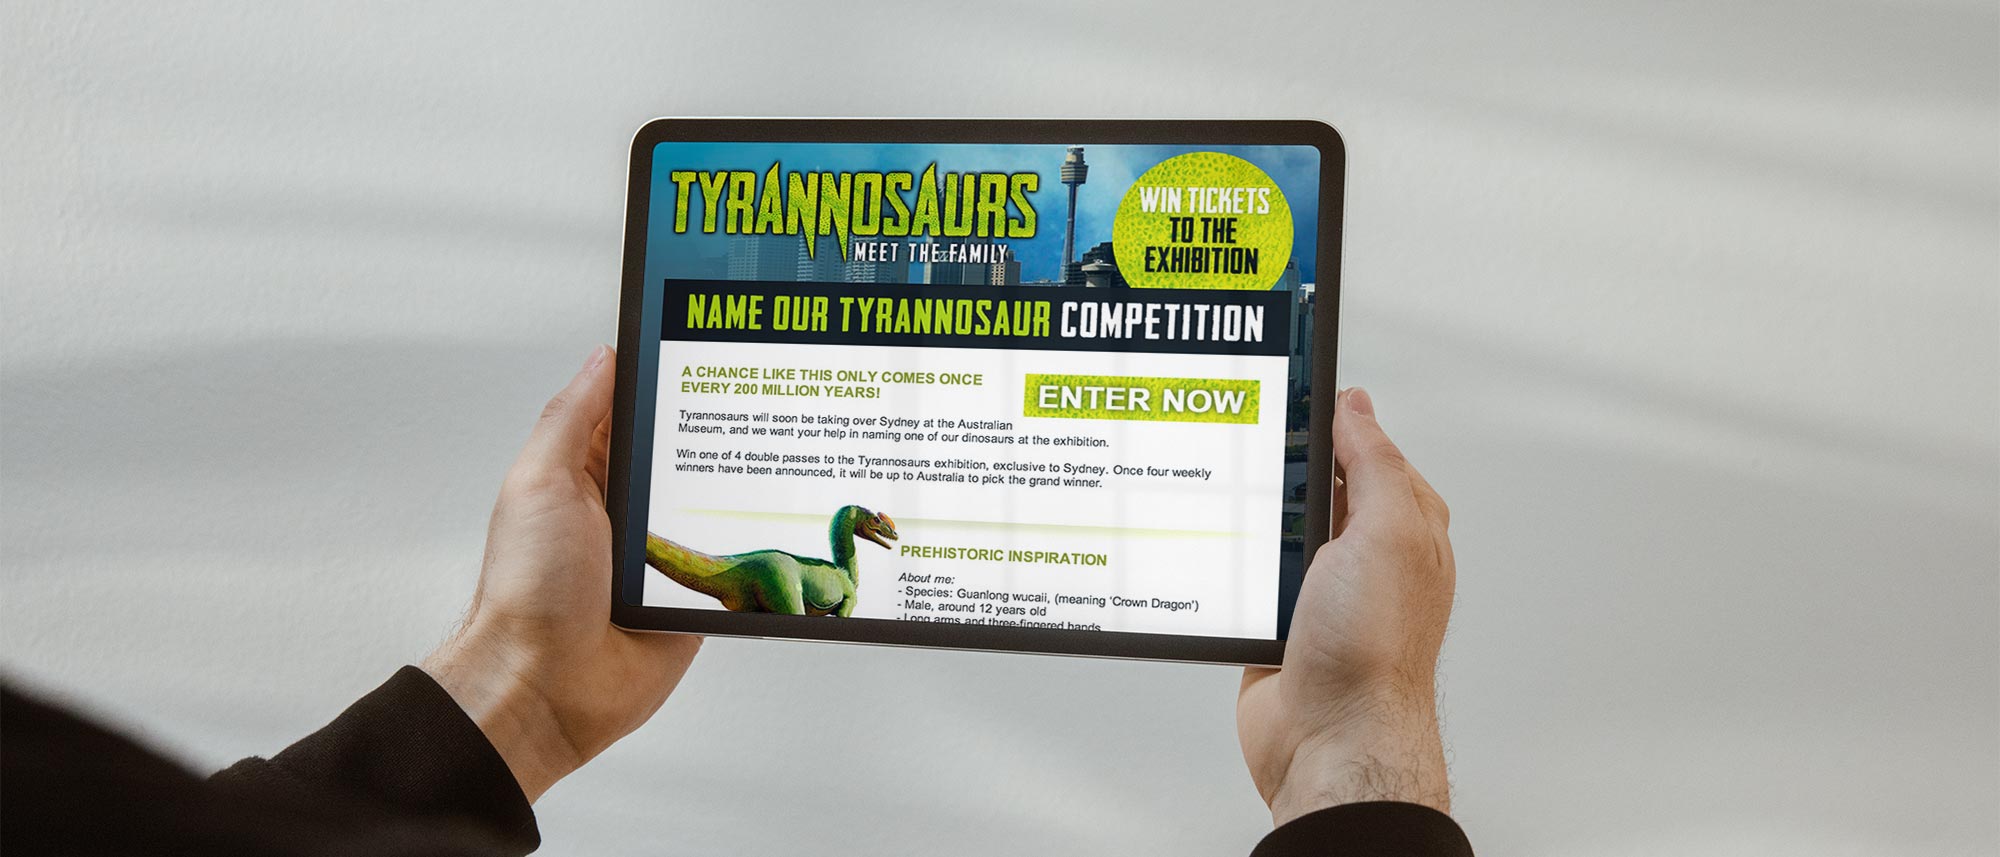 Tyrannosaurs - Facebook Page